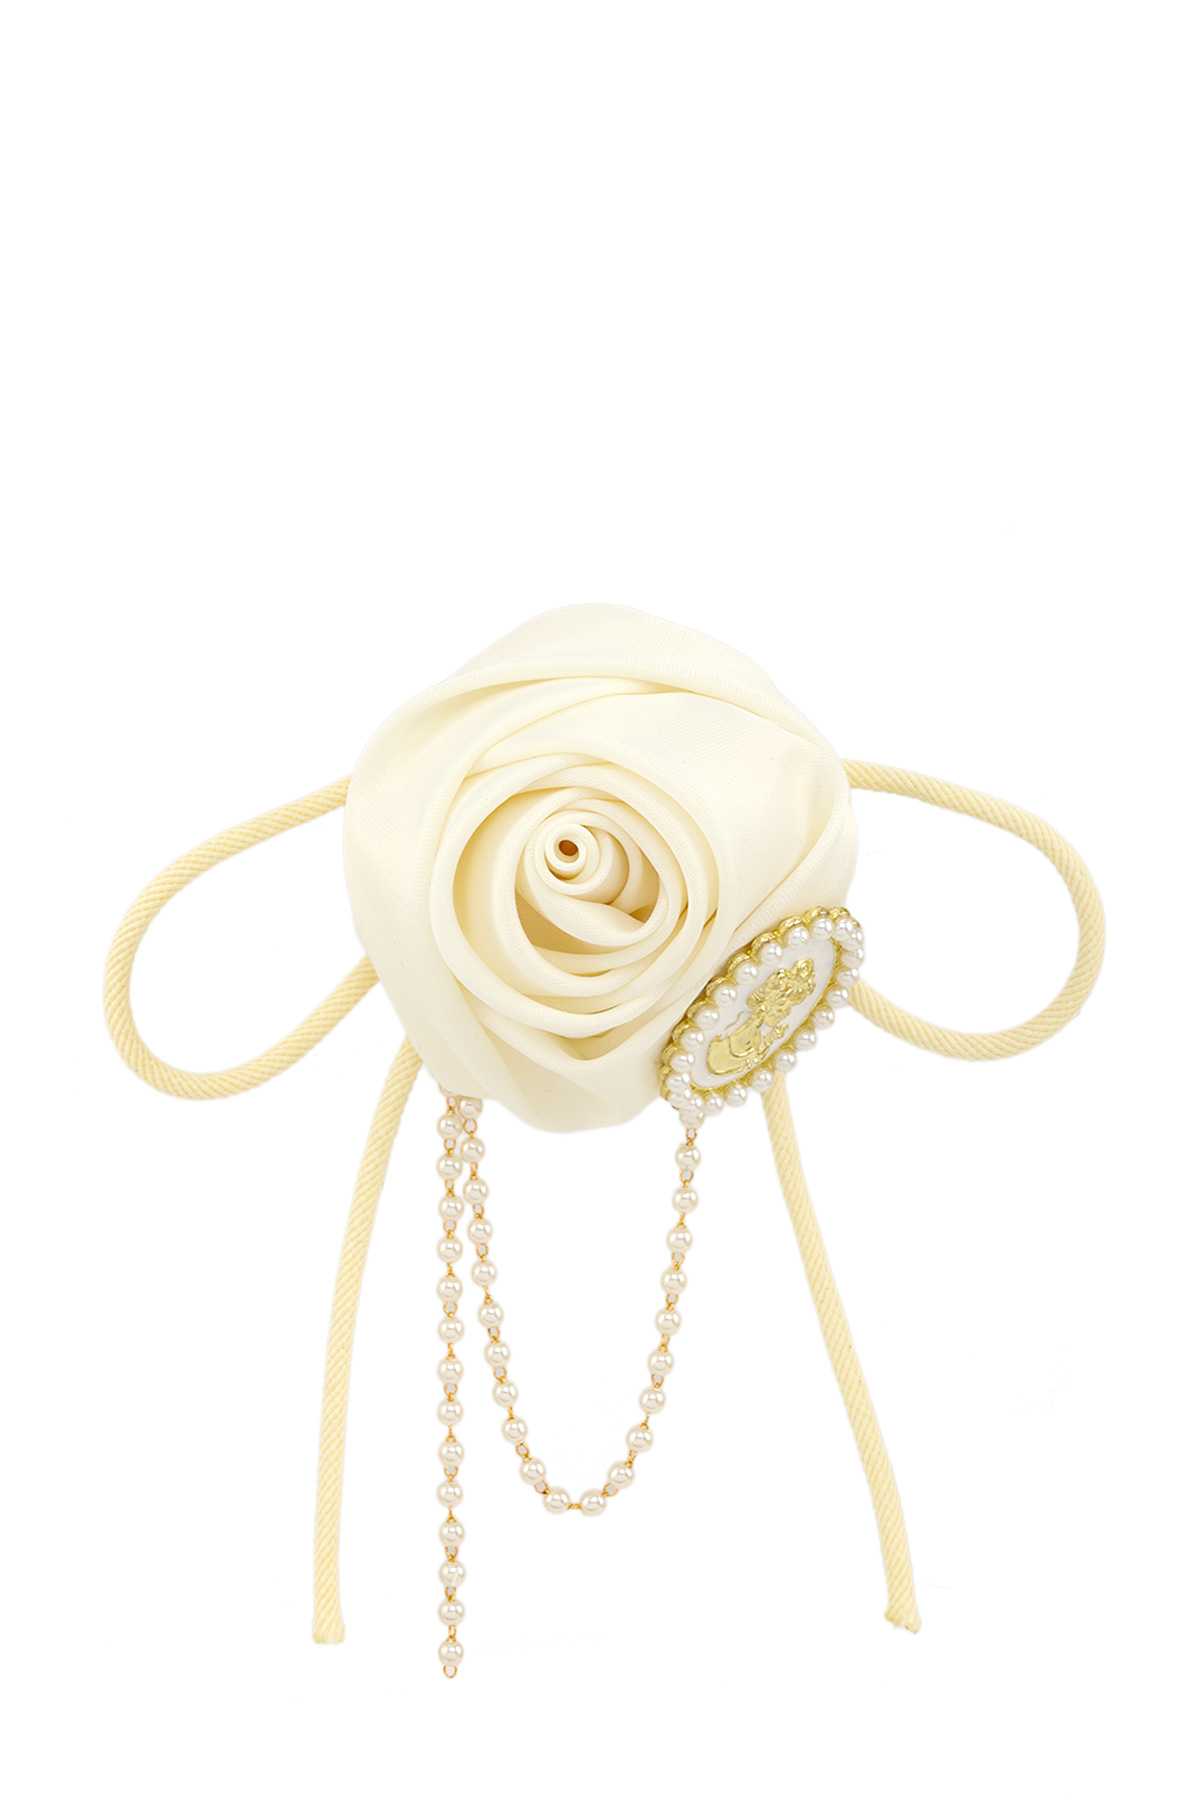 Hand Made Flower and Pearl Dangle Brooch